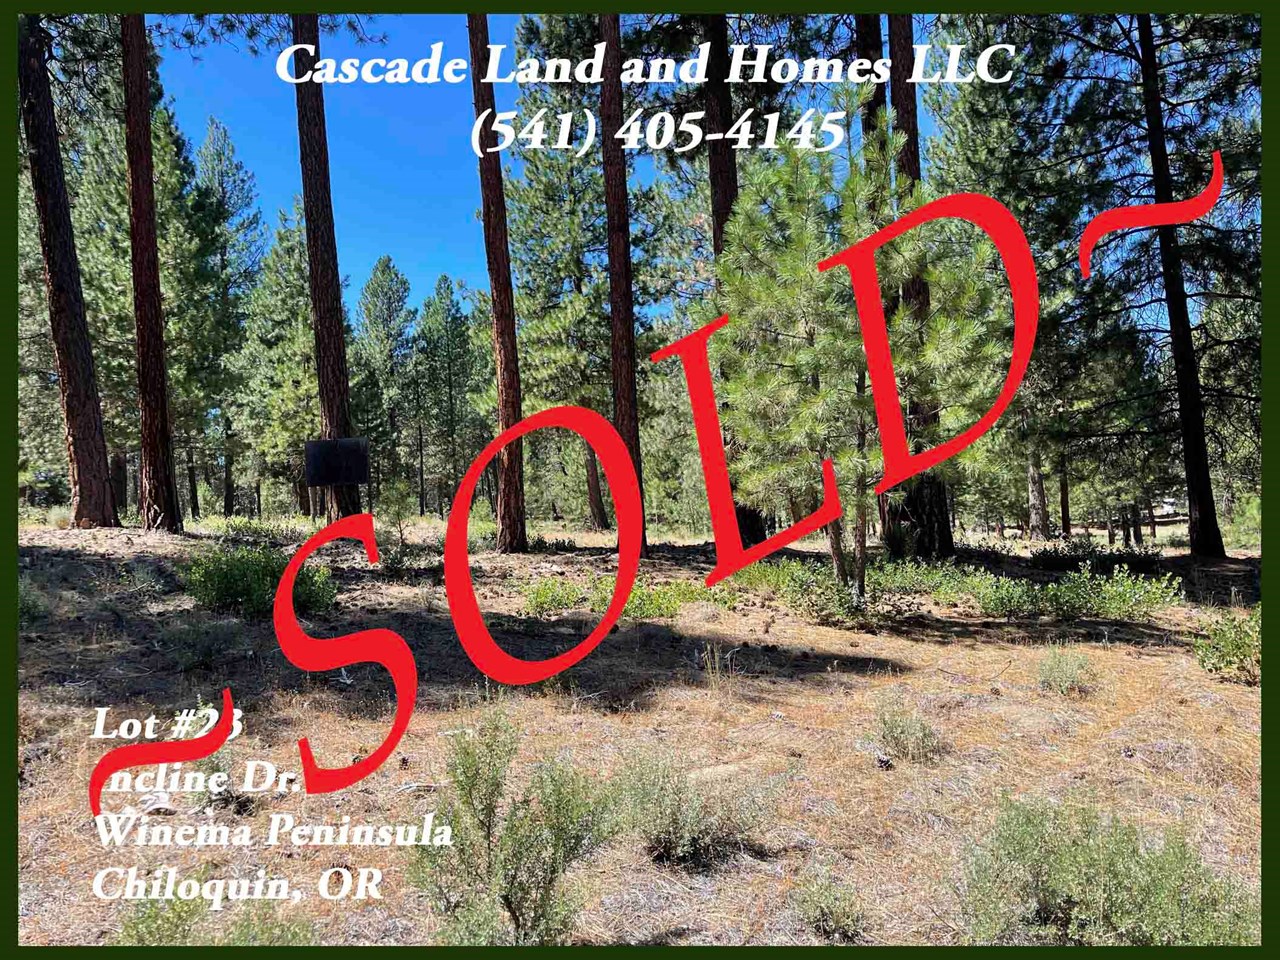 nestled in the mature ponderosa and lodgepole pines, this large, 2.81 acre property has so many possibilities! the property adjacent to this one is also for sale from the same owner, make an offer on both, and increase your property size to 4.89 acres! as soon as you step onto the property the intoxicating smell of the pines makes you feel as though you are deep in the woods! imagine being able to step out of your backdoor, or sit on the deck of your new home and enjoy the tall trees, smells and sounds of the forest every day! the property is less than 1/2 mile to the banks of the legendary world-class fly fishing of the williamson river!  give our office a call today for more information!
